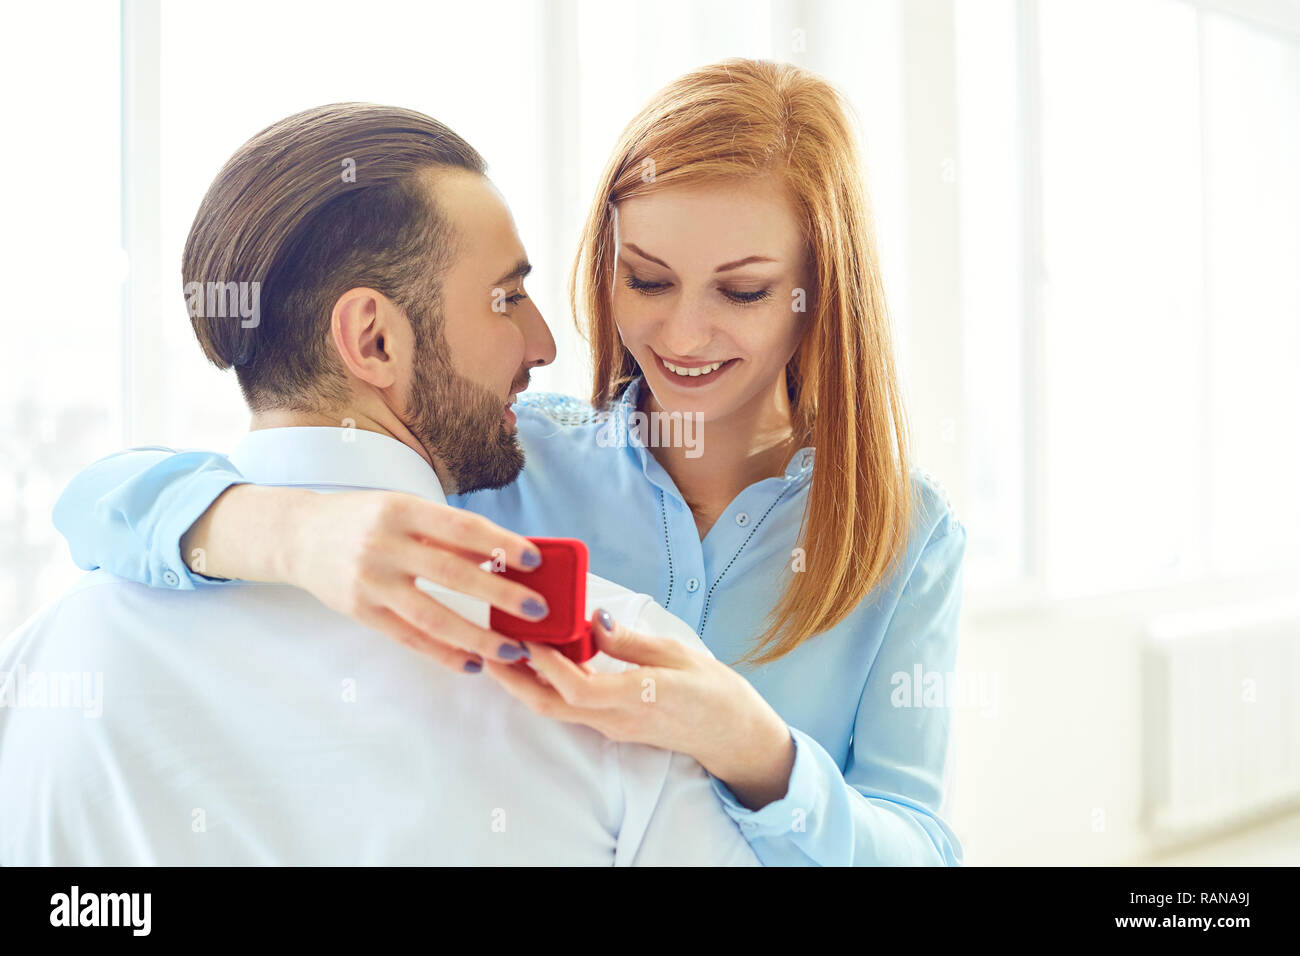 Man proposes to a girl in room with bright windows. Stock Photo